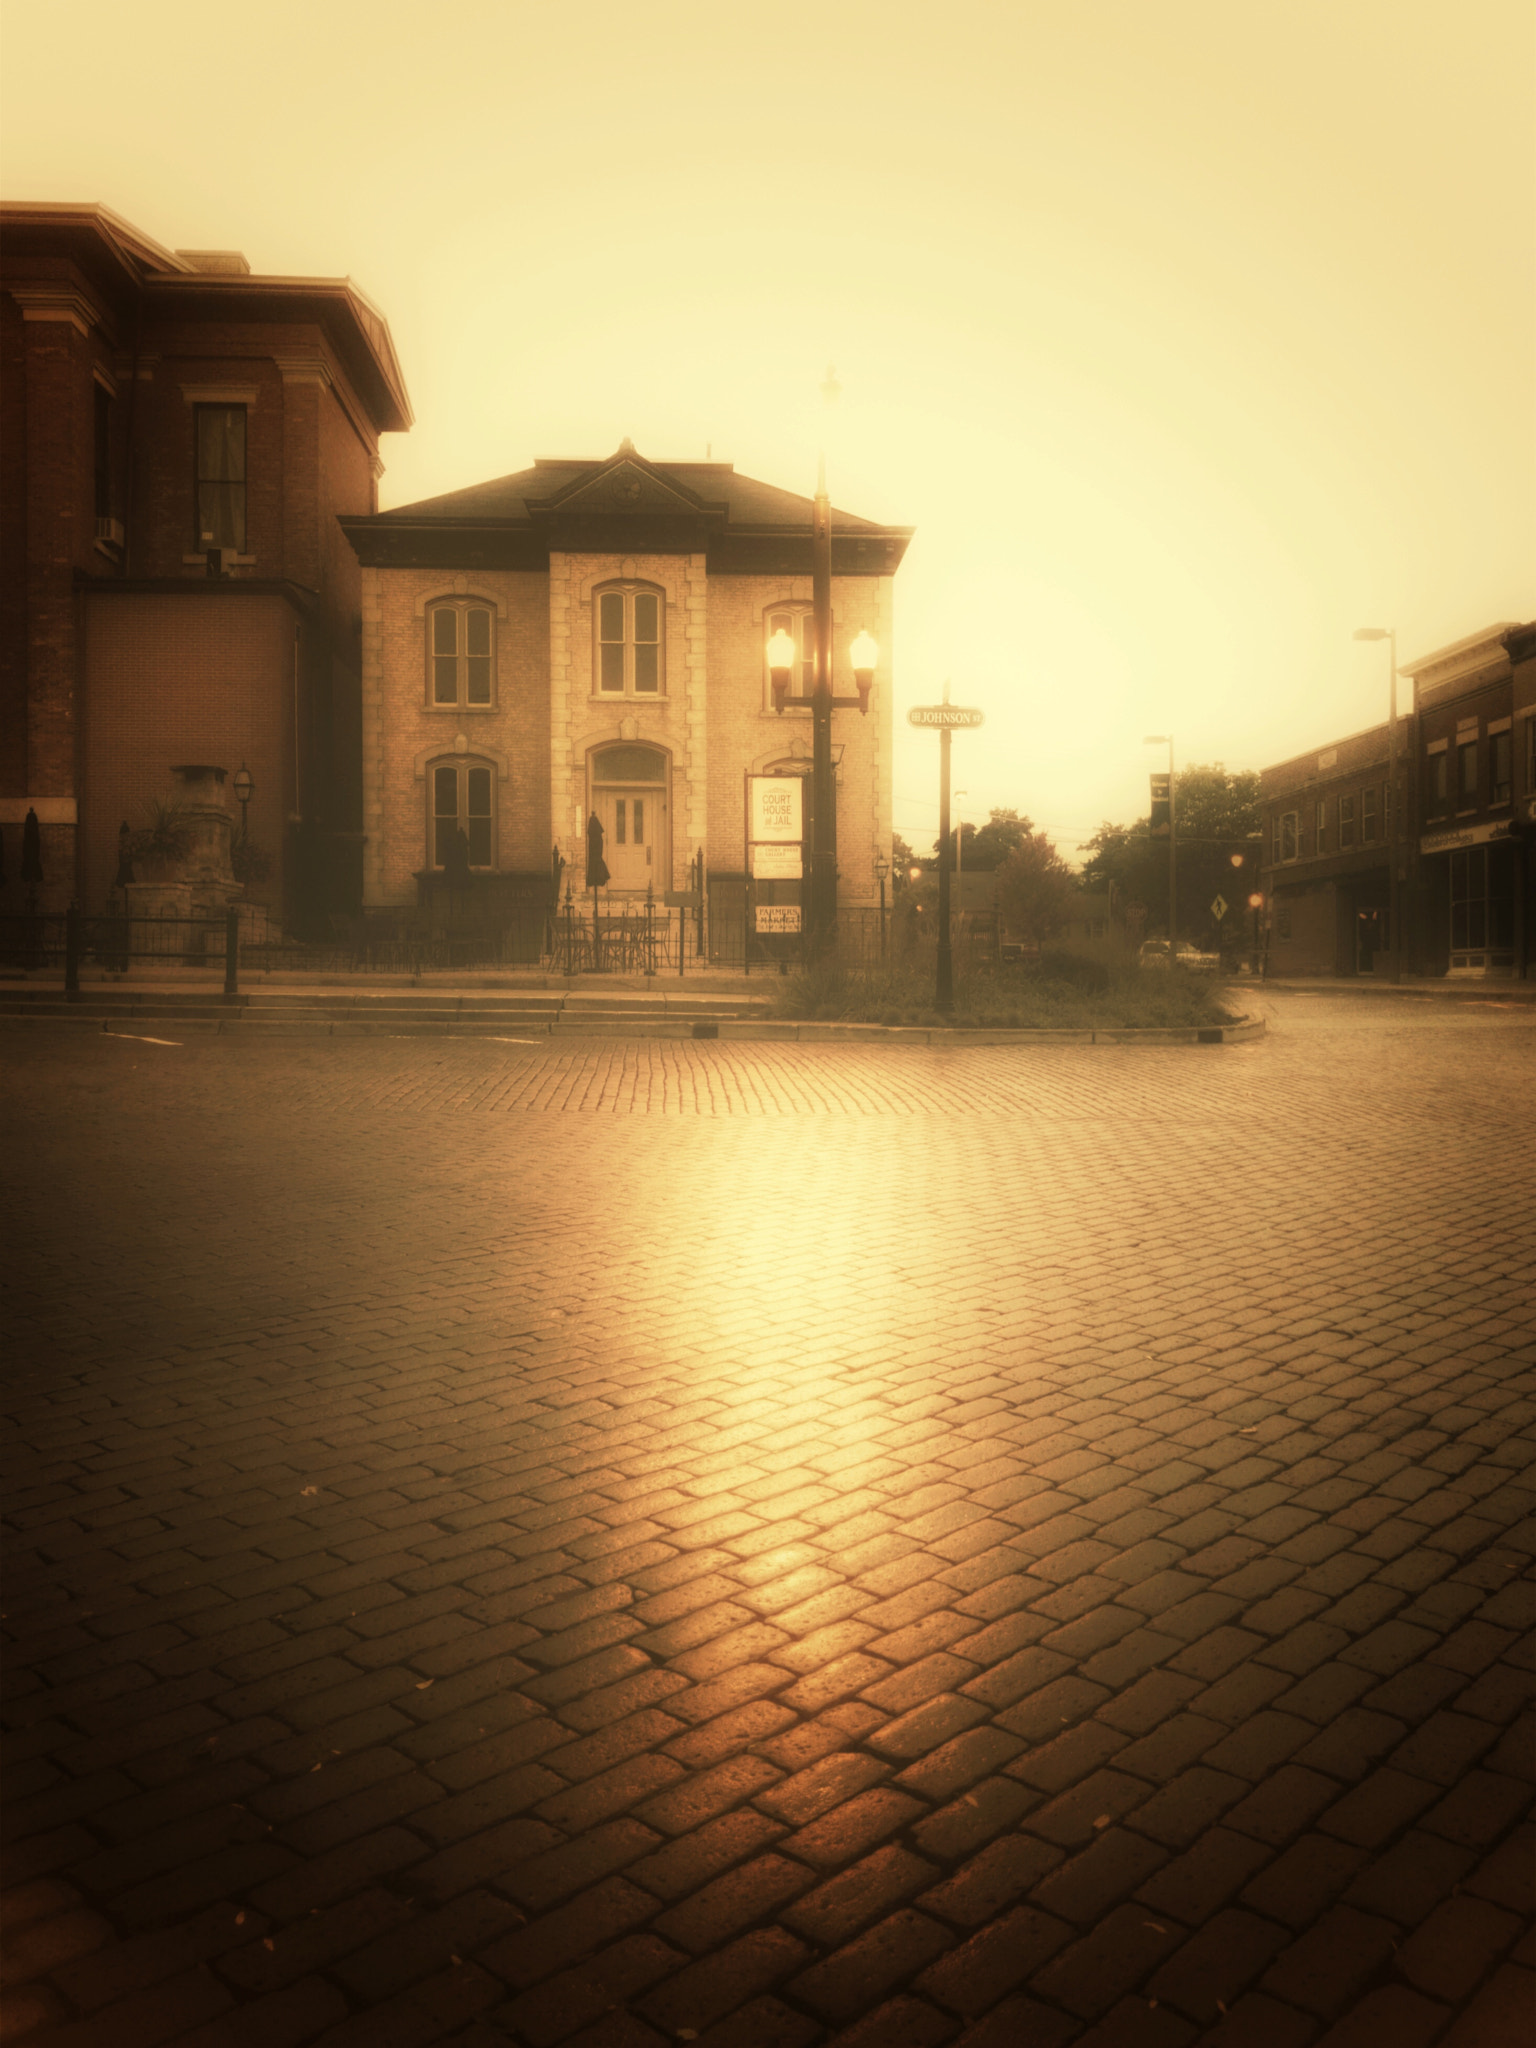 Apple iPhone sample photo. The historic woodstock square photography